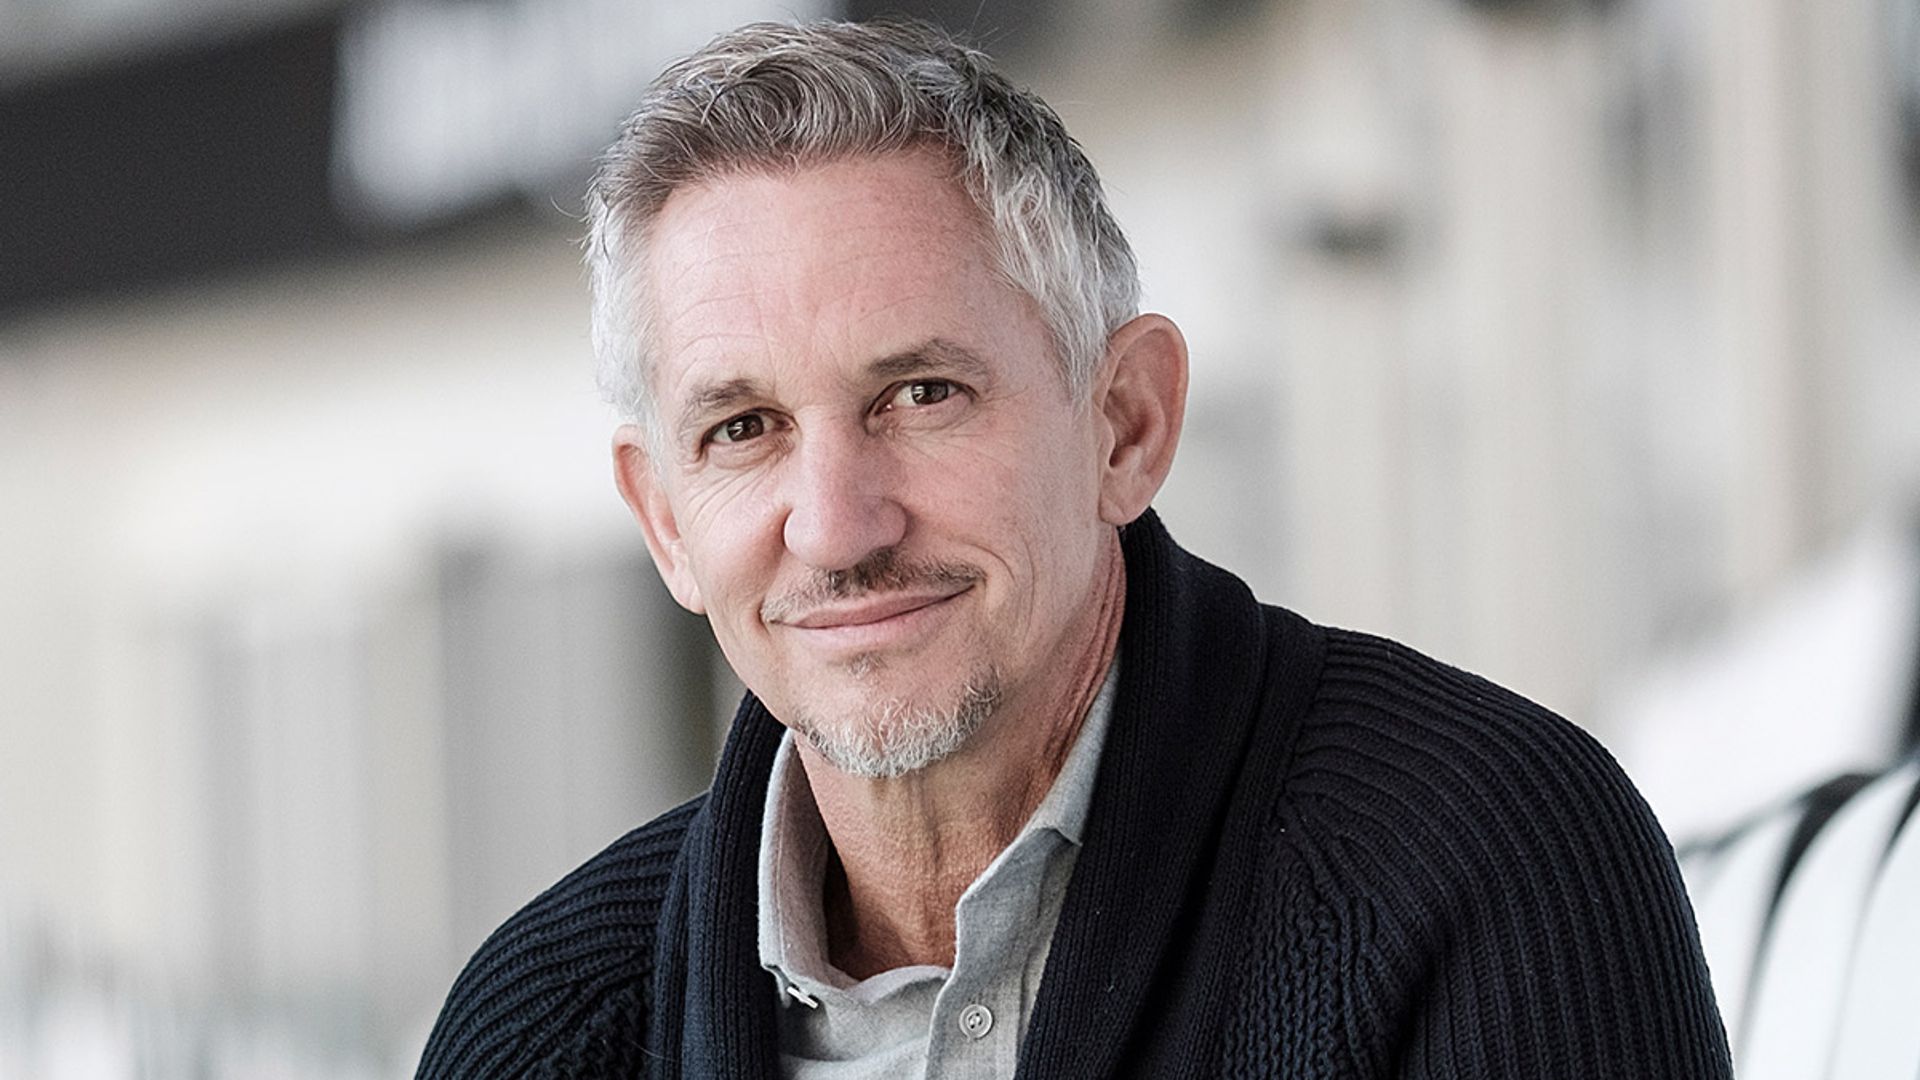 Gary Lineker sparks controversy with photo of eldest son on special occasion